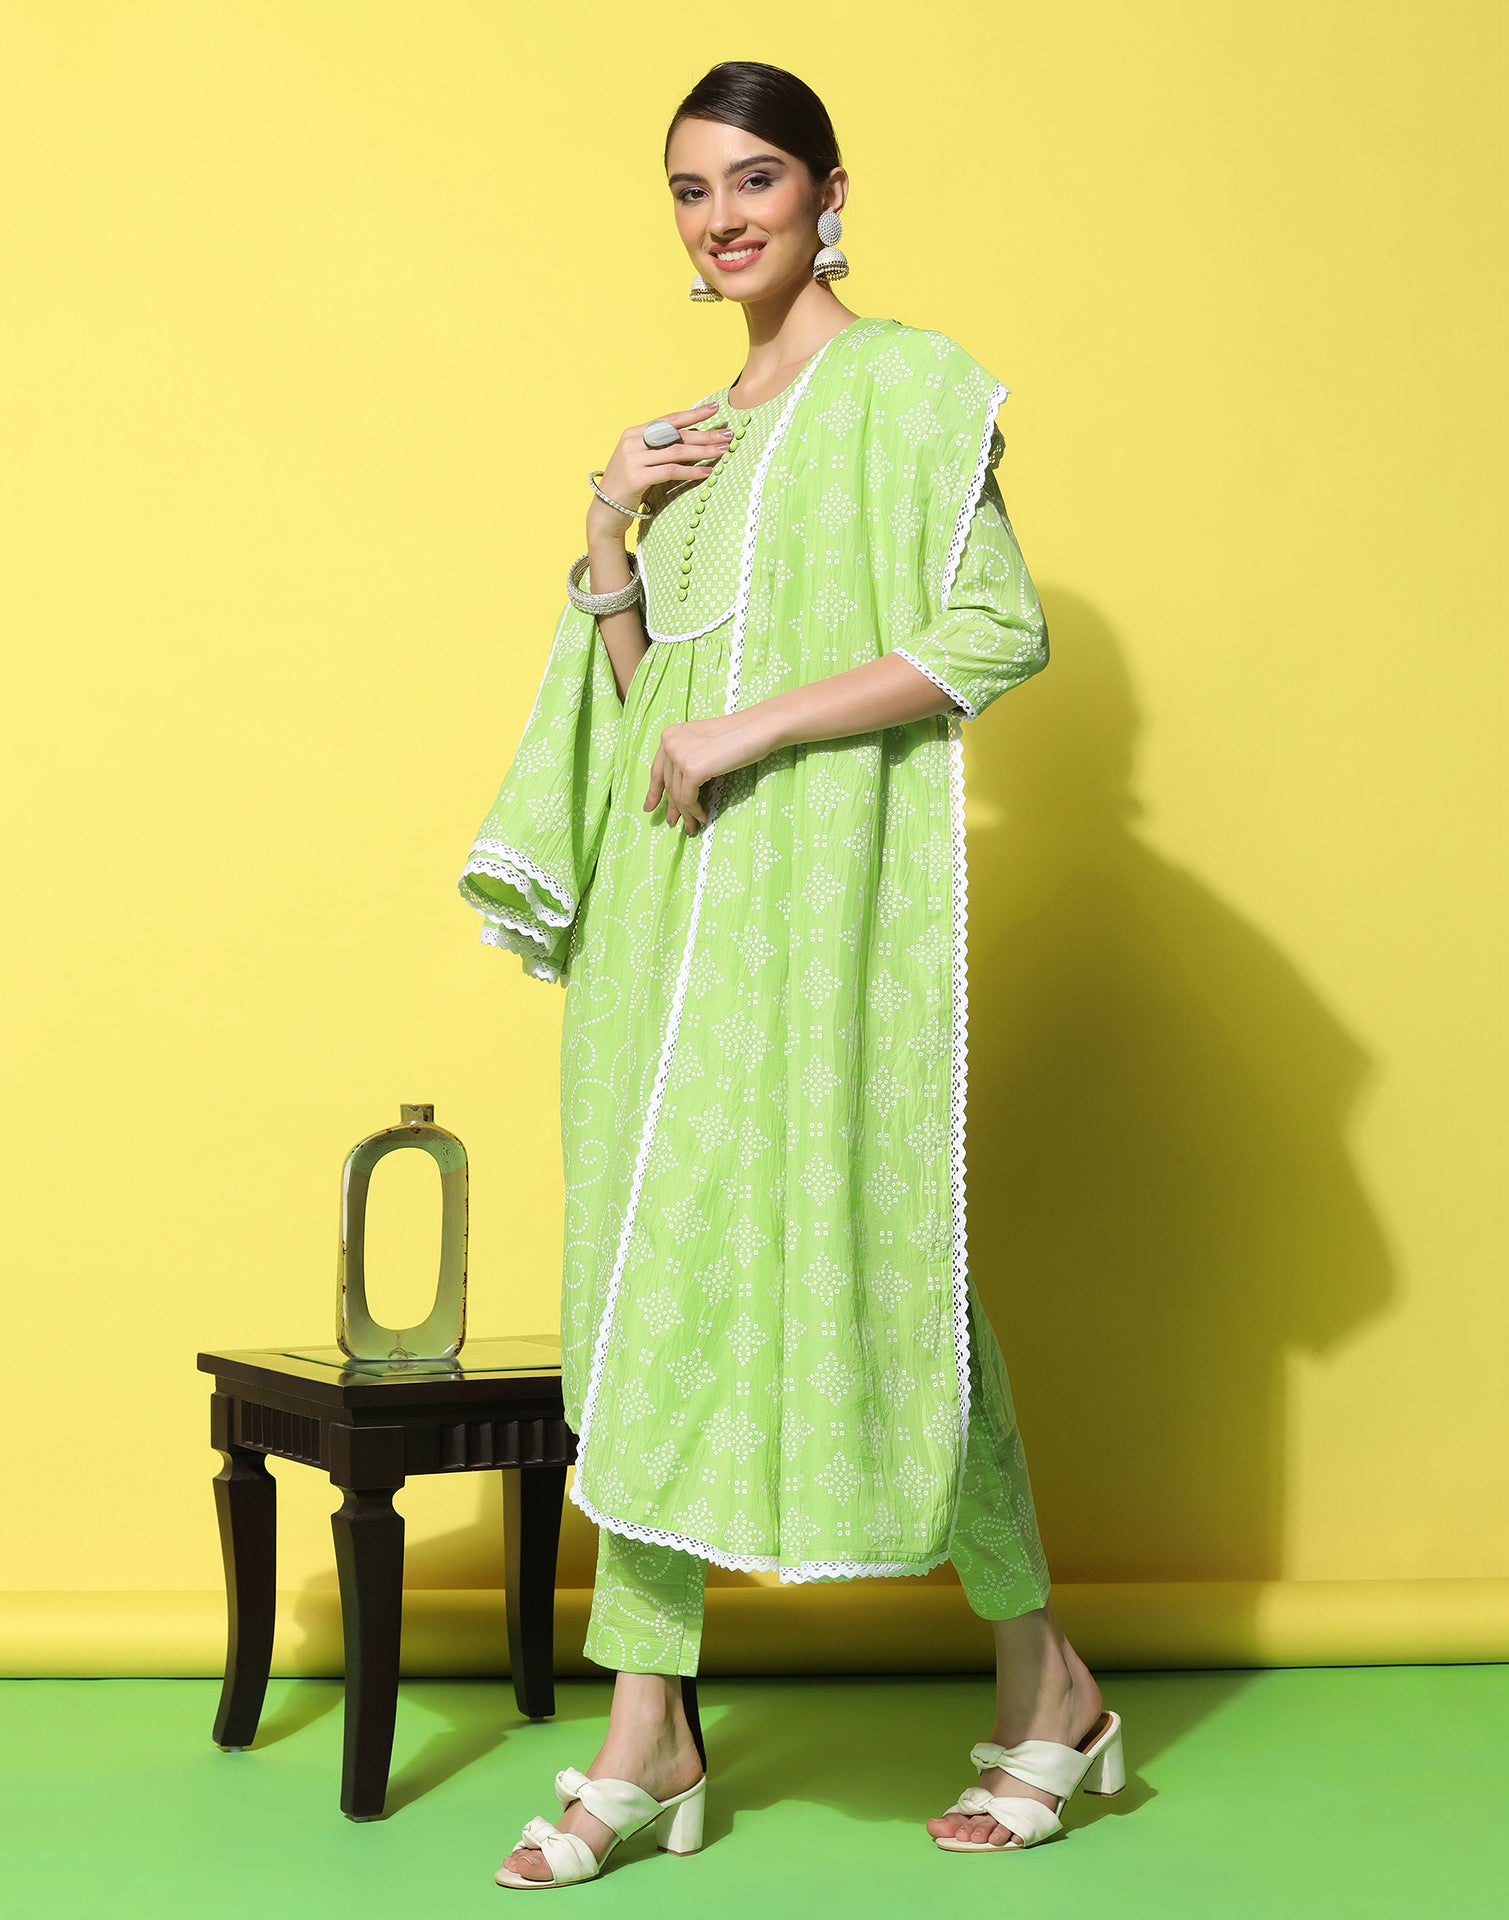 Fluorescent Green Solid Colour Kurtis – The Pajama Factory